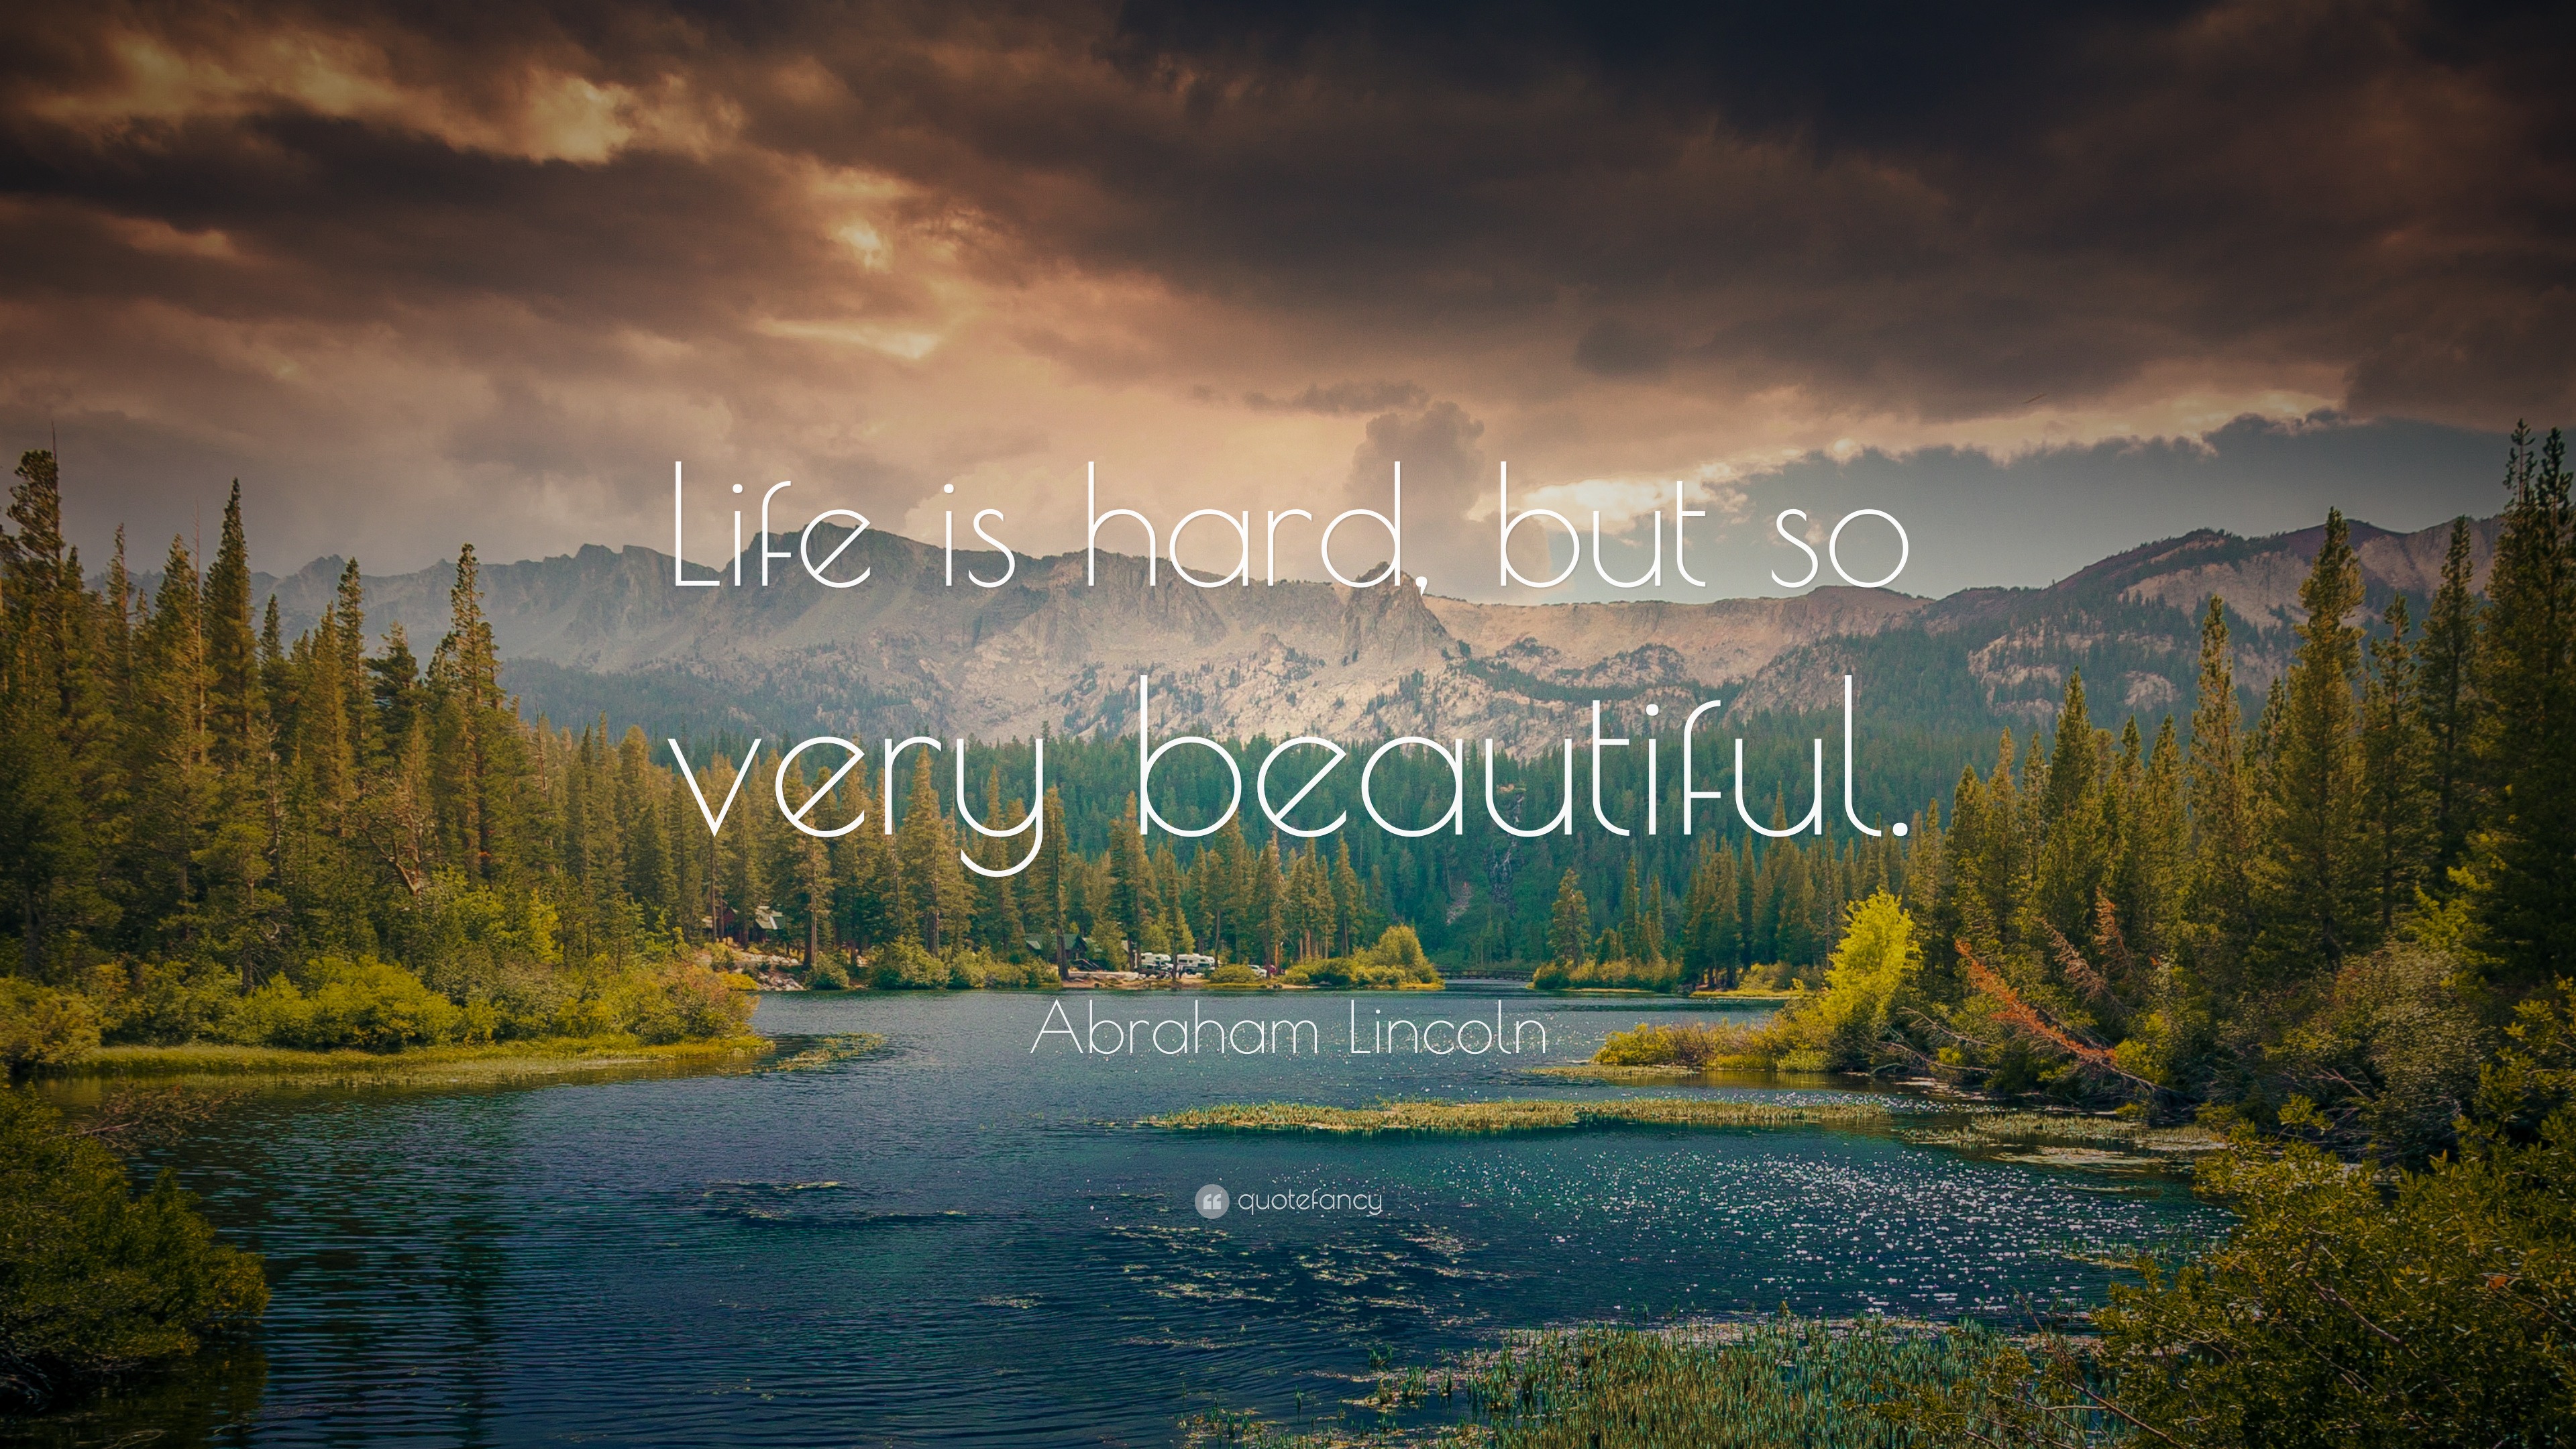 Abraham Lincoln Quote “Life is hard, but so very